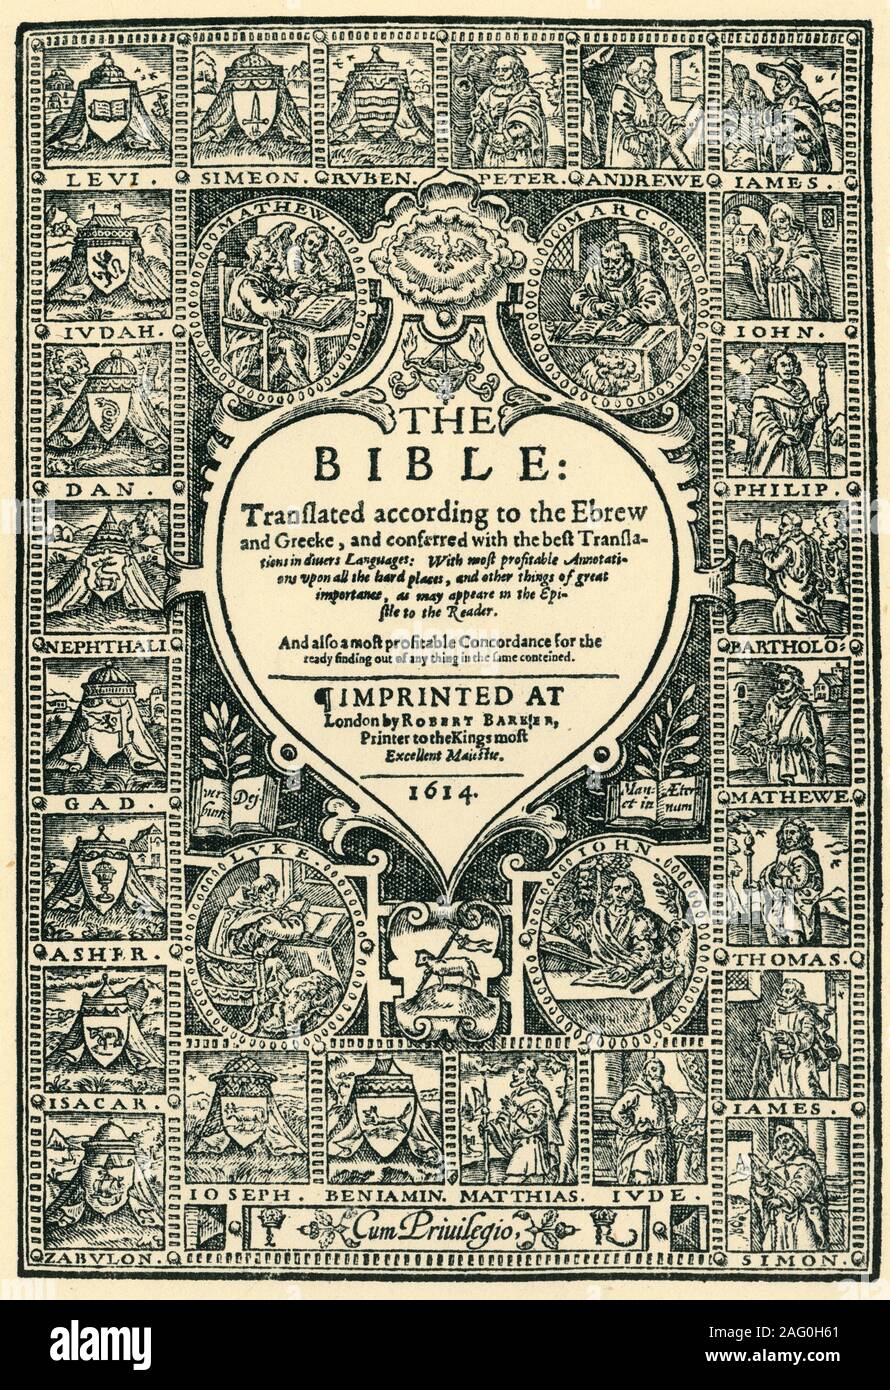 'Title Page of the Geneva Bible', 1614, (1943). The &quot;Geneva&quot; version of the Bible is significant because it was the first mechanically printed, mass-produced Bible in English which was available directly to the general public in Britain. In Scotland, a law was passed in 1579 requiring every household of sufficient means to buy a copy. This was a complete change from the previous position of the state which made printing or publishing the Bible in anything other than Latin a crime punishable by death. Published by Robert Barker, printer to King James I, (London, 1614). From &quot;The Stock Photo